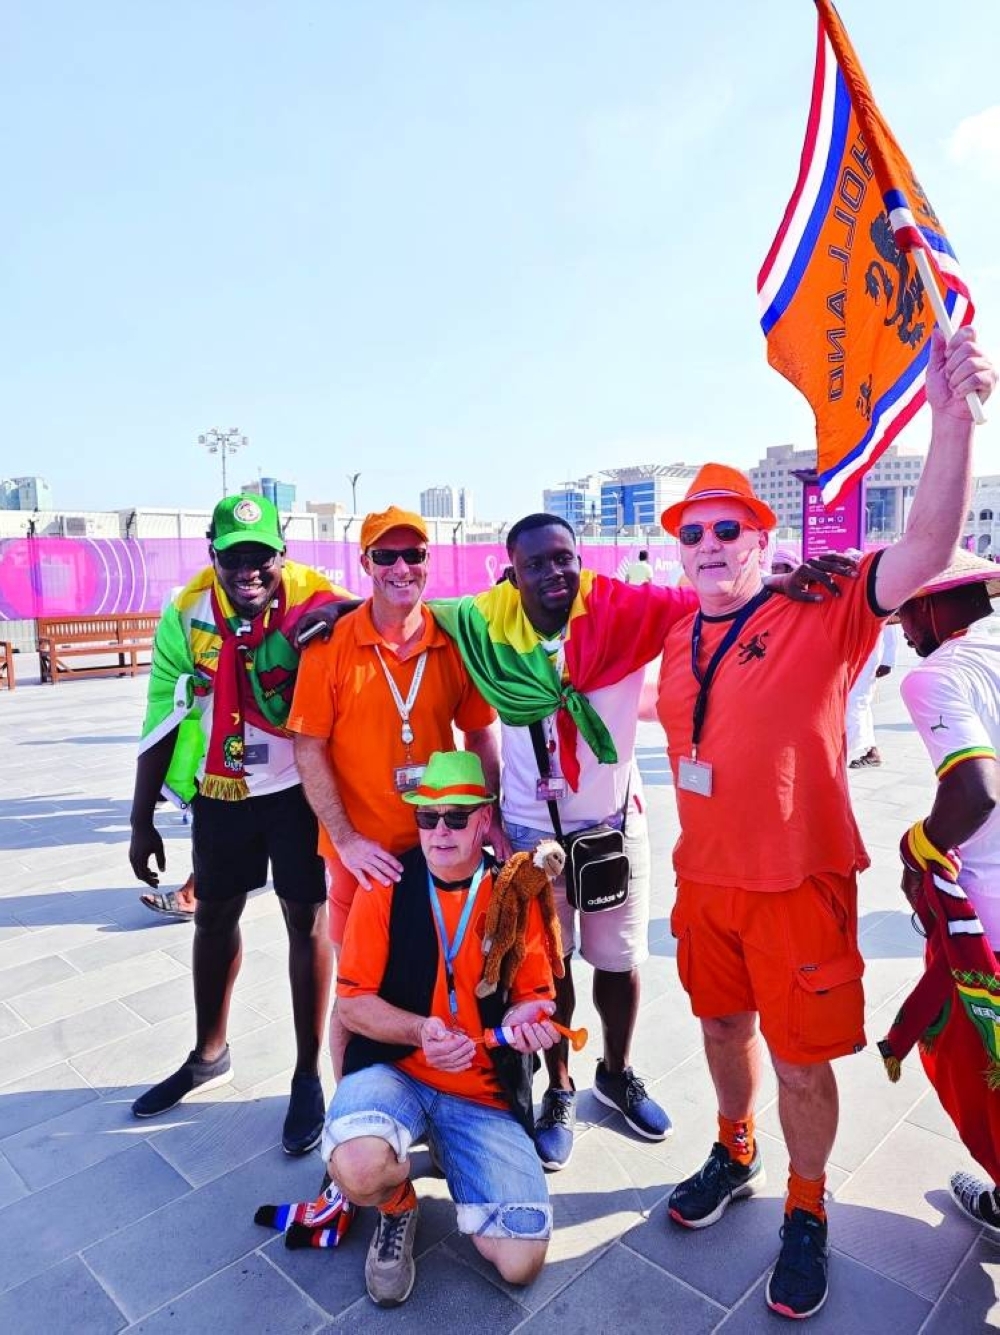 The Dutch and Senegal fans share camaraderie at Souq Waqif. PICTURE: Joseph Varghese.